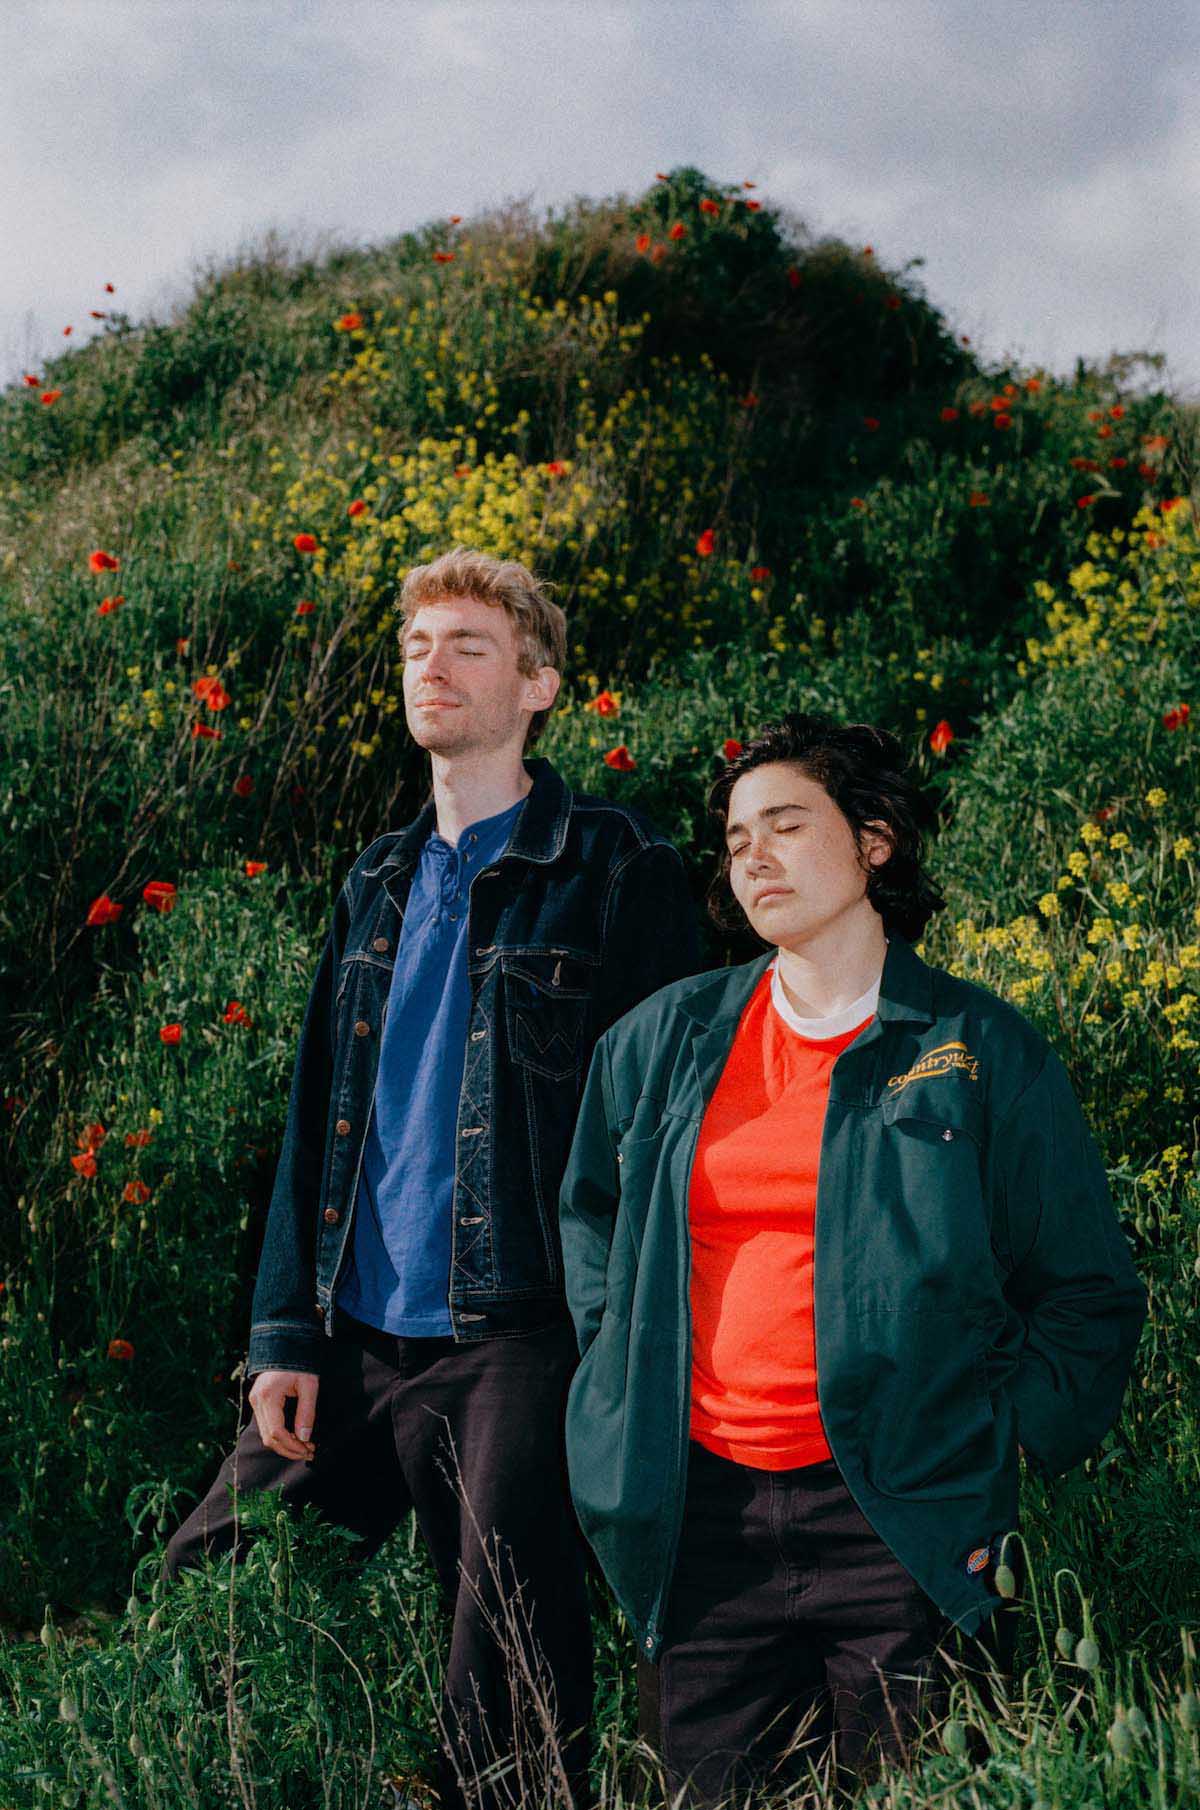 The two members of the band Aili are standing in front of a hill covered with tall grass and flowers with yellow and red blossoms. Aili Maruyama and Orson Wouters are standing upright next to each other in the middle of the picture, their eyes closed and their bodies slightly turned in to the left. He has short blond hair, a three-day beard, wears black trousers, a blue T-shirt and a darker denim jacket. She has chin-length black hair tucked behind her ears on the visible side. Aili is wearing an orange-red T-shirt with a dark green hip-length jacket over it and black trousers.